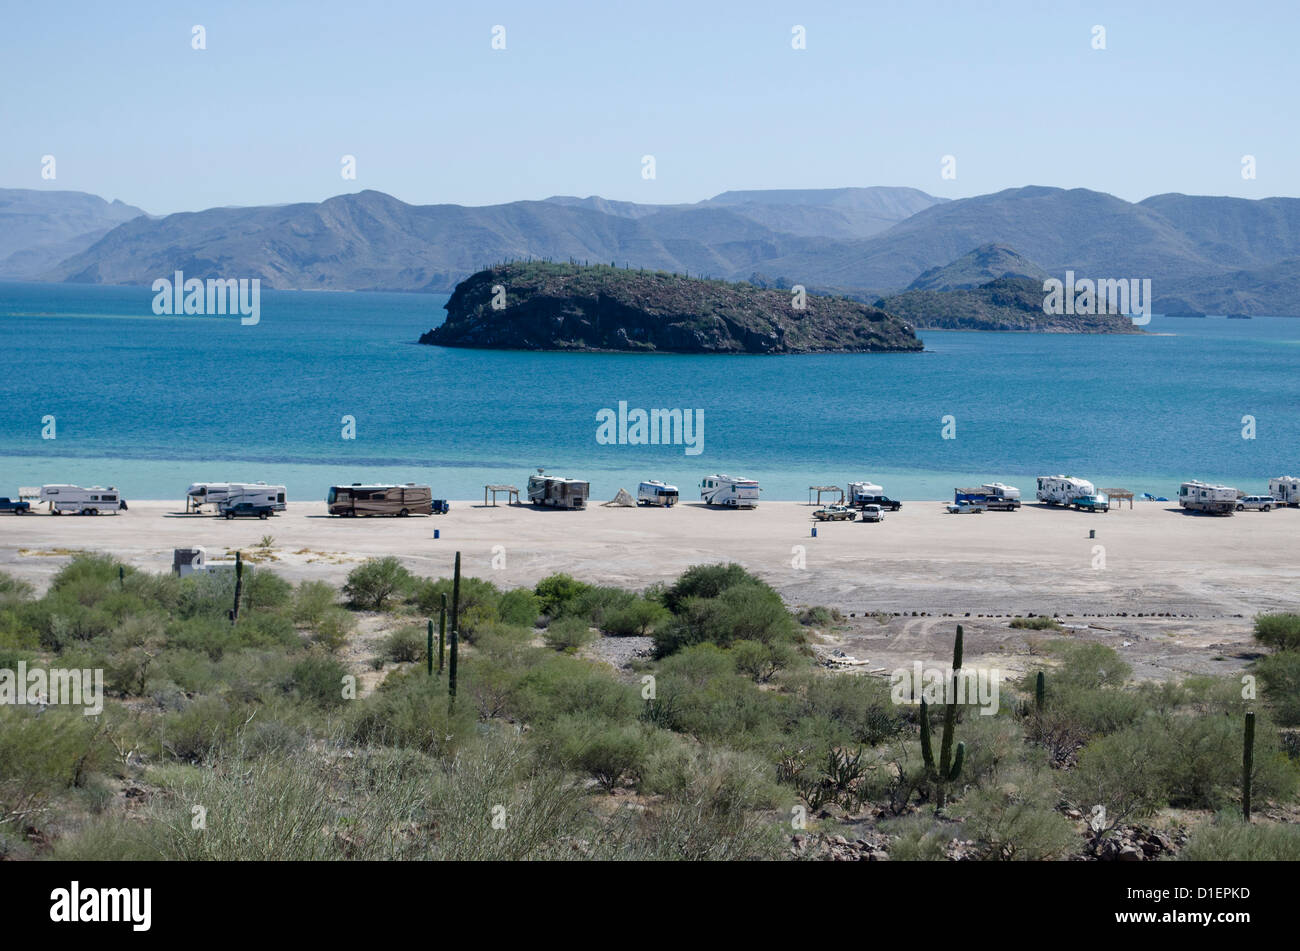 Campers on the beach on Bahia Conception Baja Mexico Stock Photo